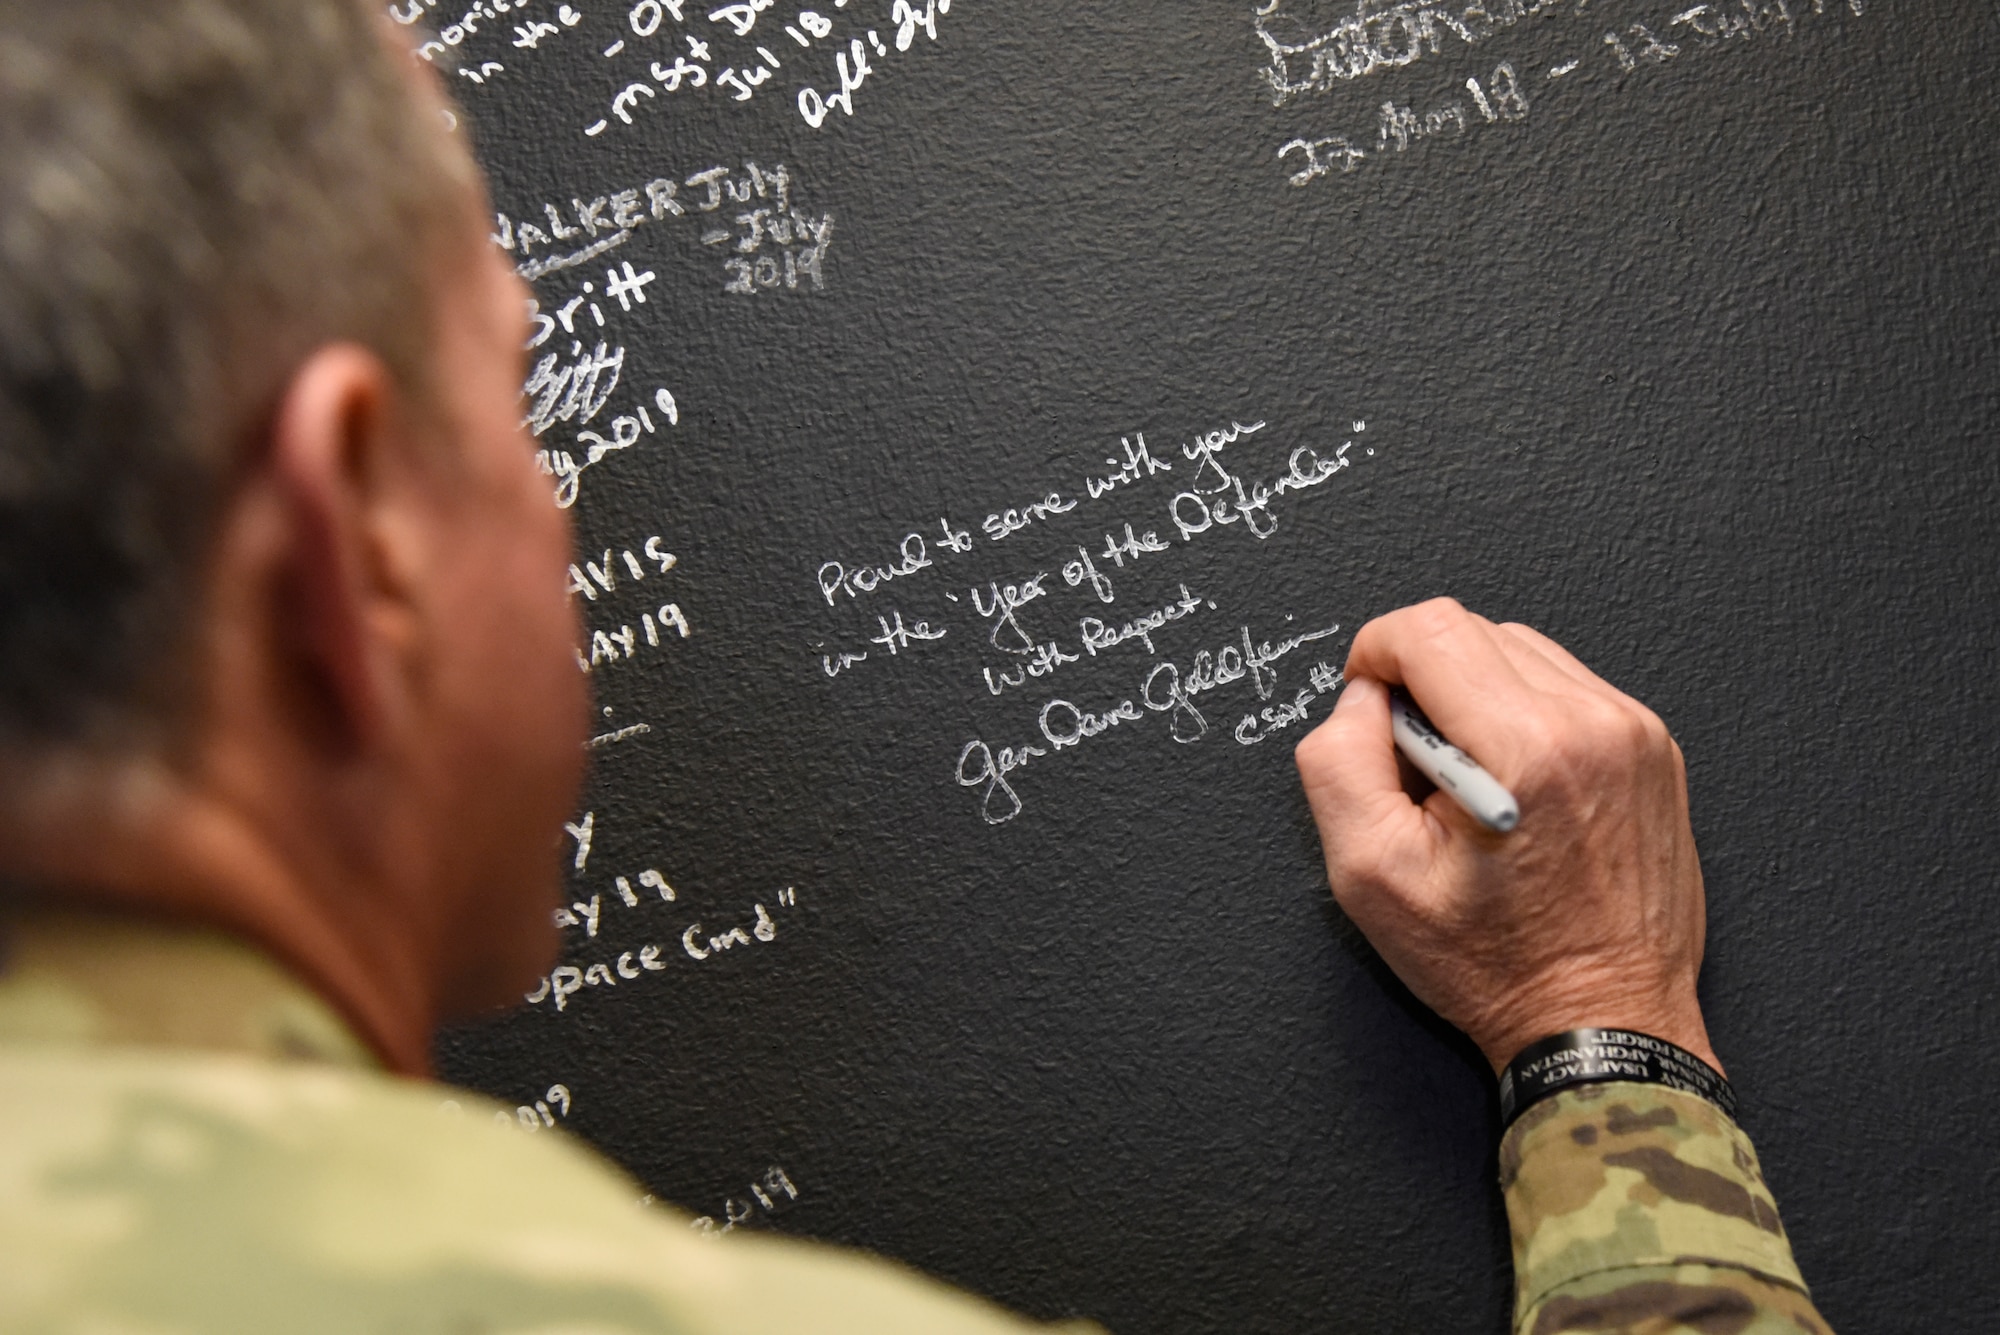 The 21st Air Force Chief of Staff David Goldfein, signs the 821st Security Forces Squadron’s Defender wall during his visit to Thule Air Base, Greenland July 20, 2019. Thule AB was the last stop of a 10-day visit with allies and partners in Europe including Estonia, Finland, United Kingdom, Germany and Greenland. (U.S. Air Force photo by Staff Sgt. Alexandra M. Longfellow)